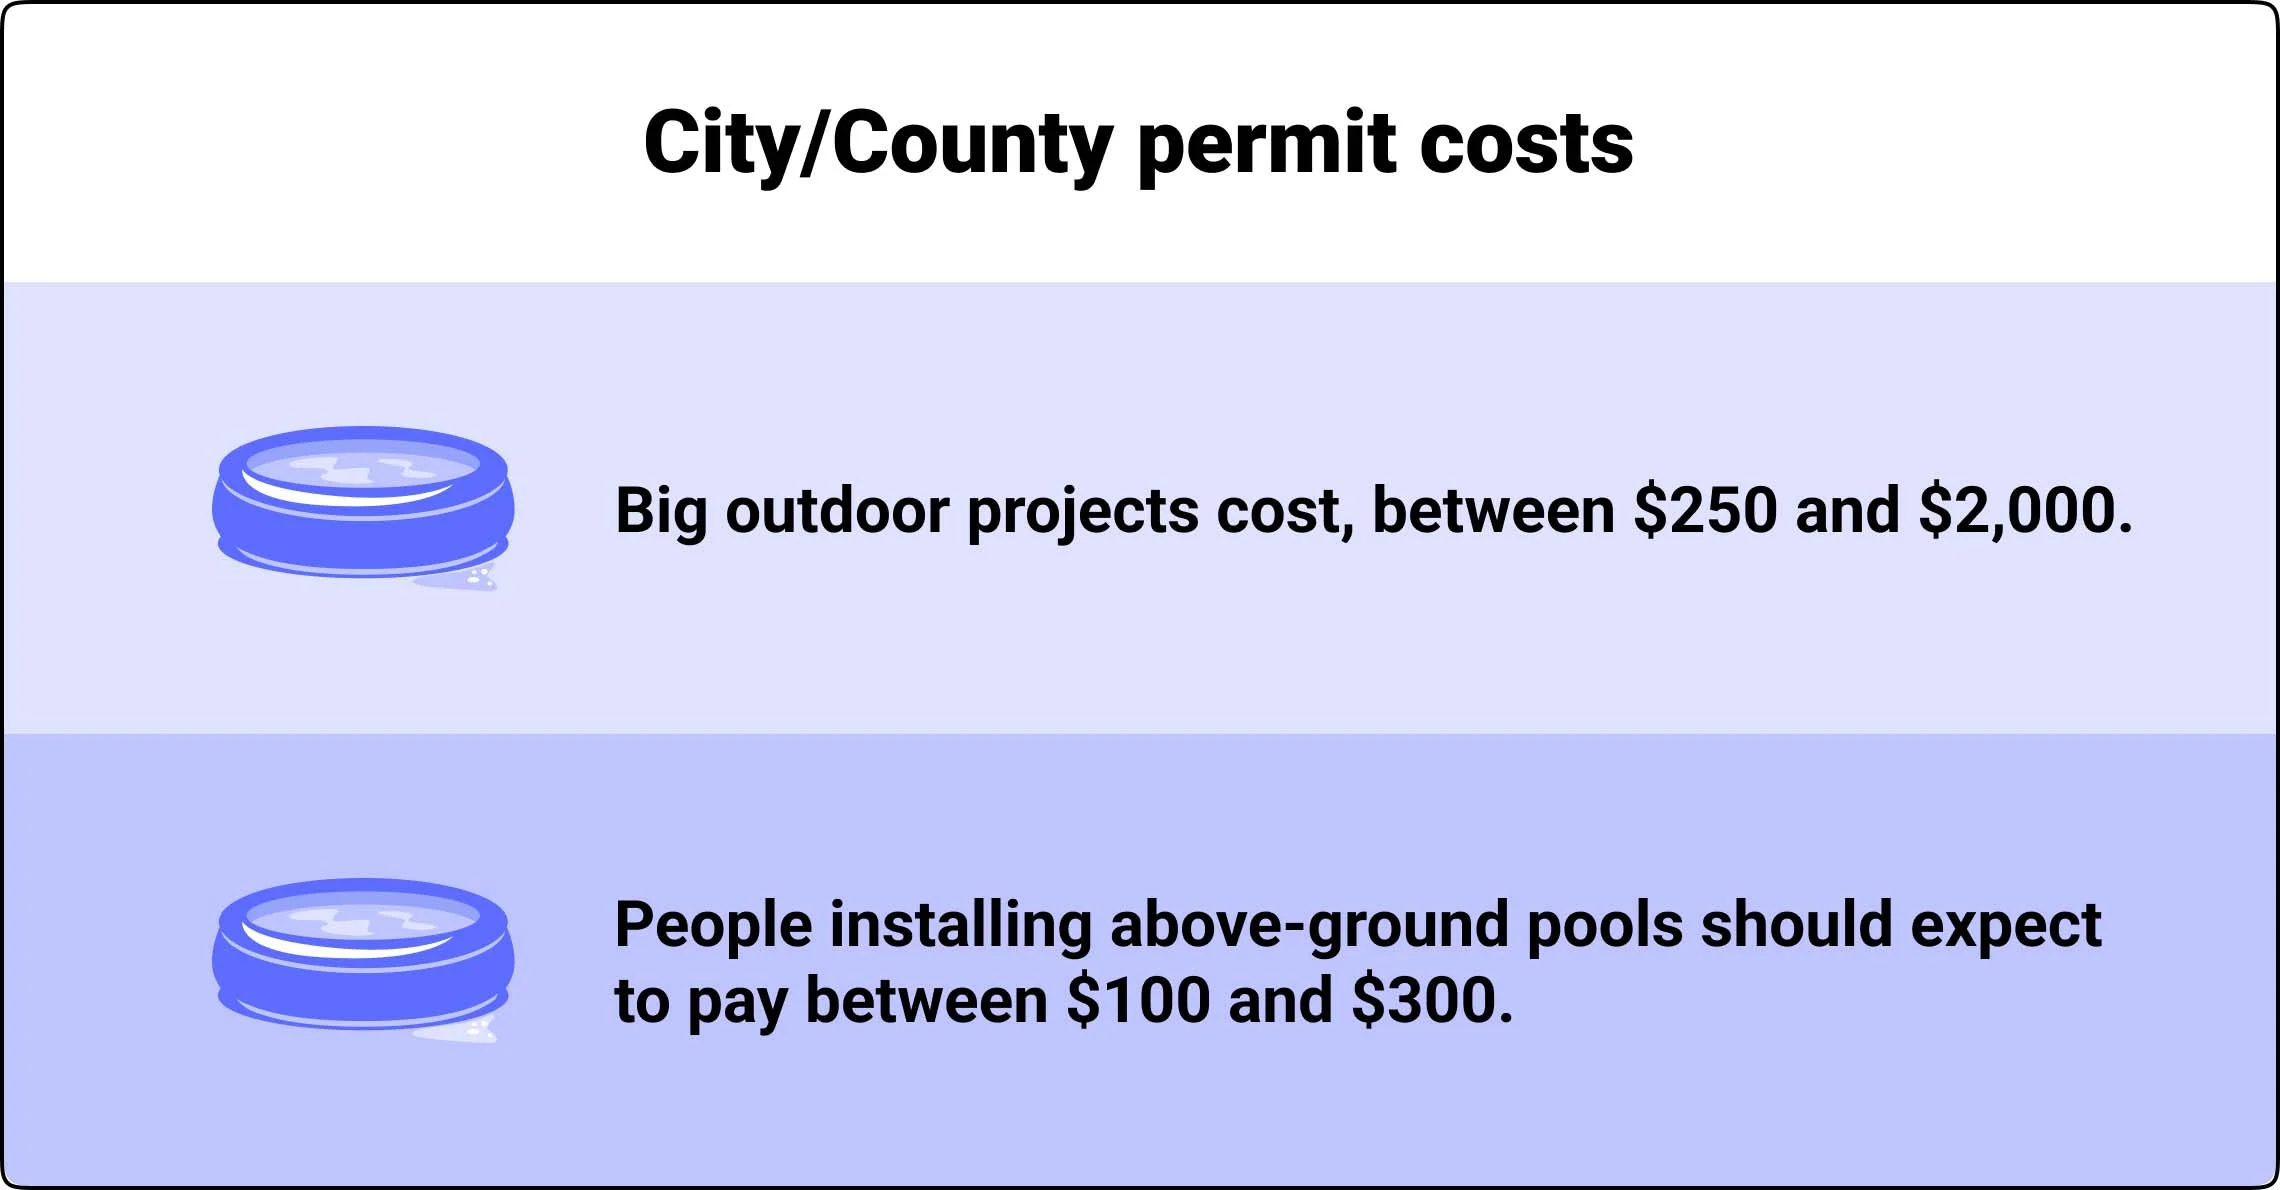 City and county permit costs